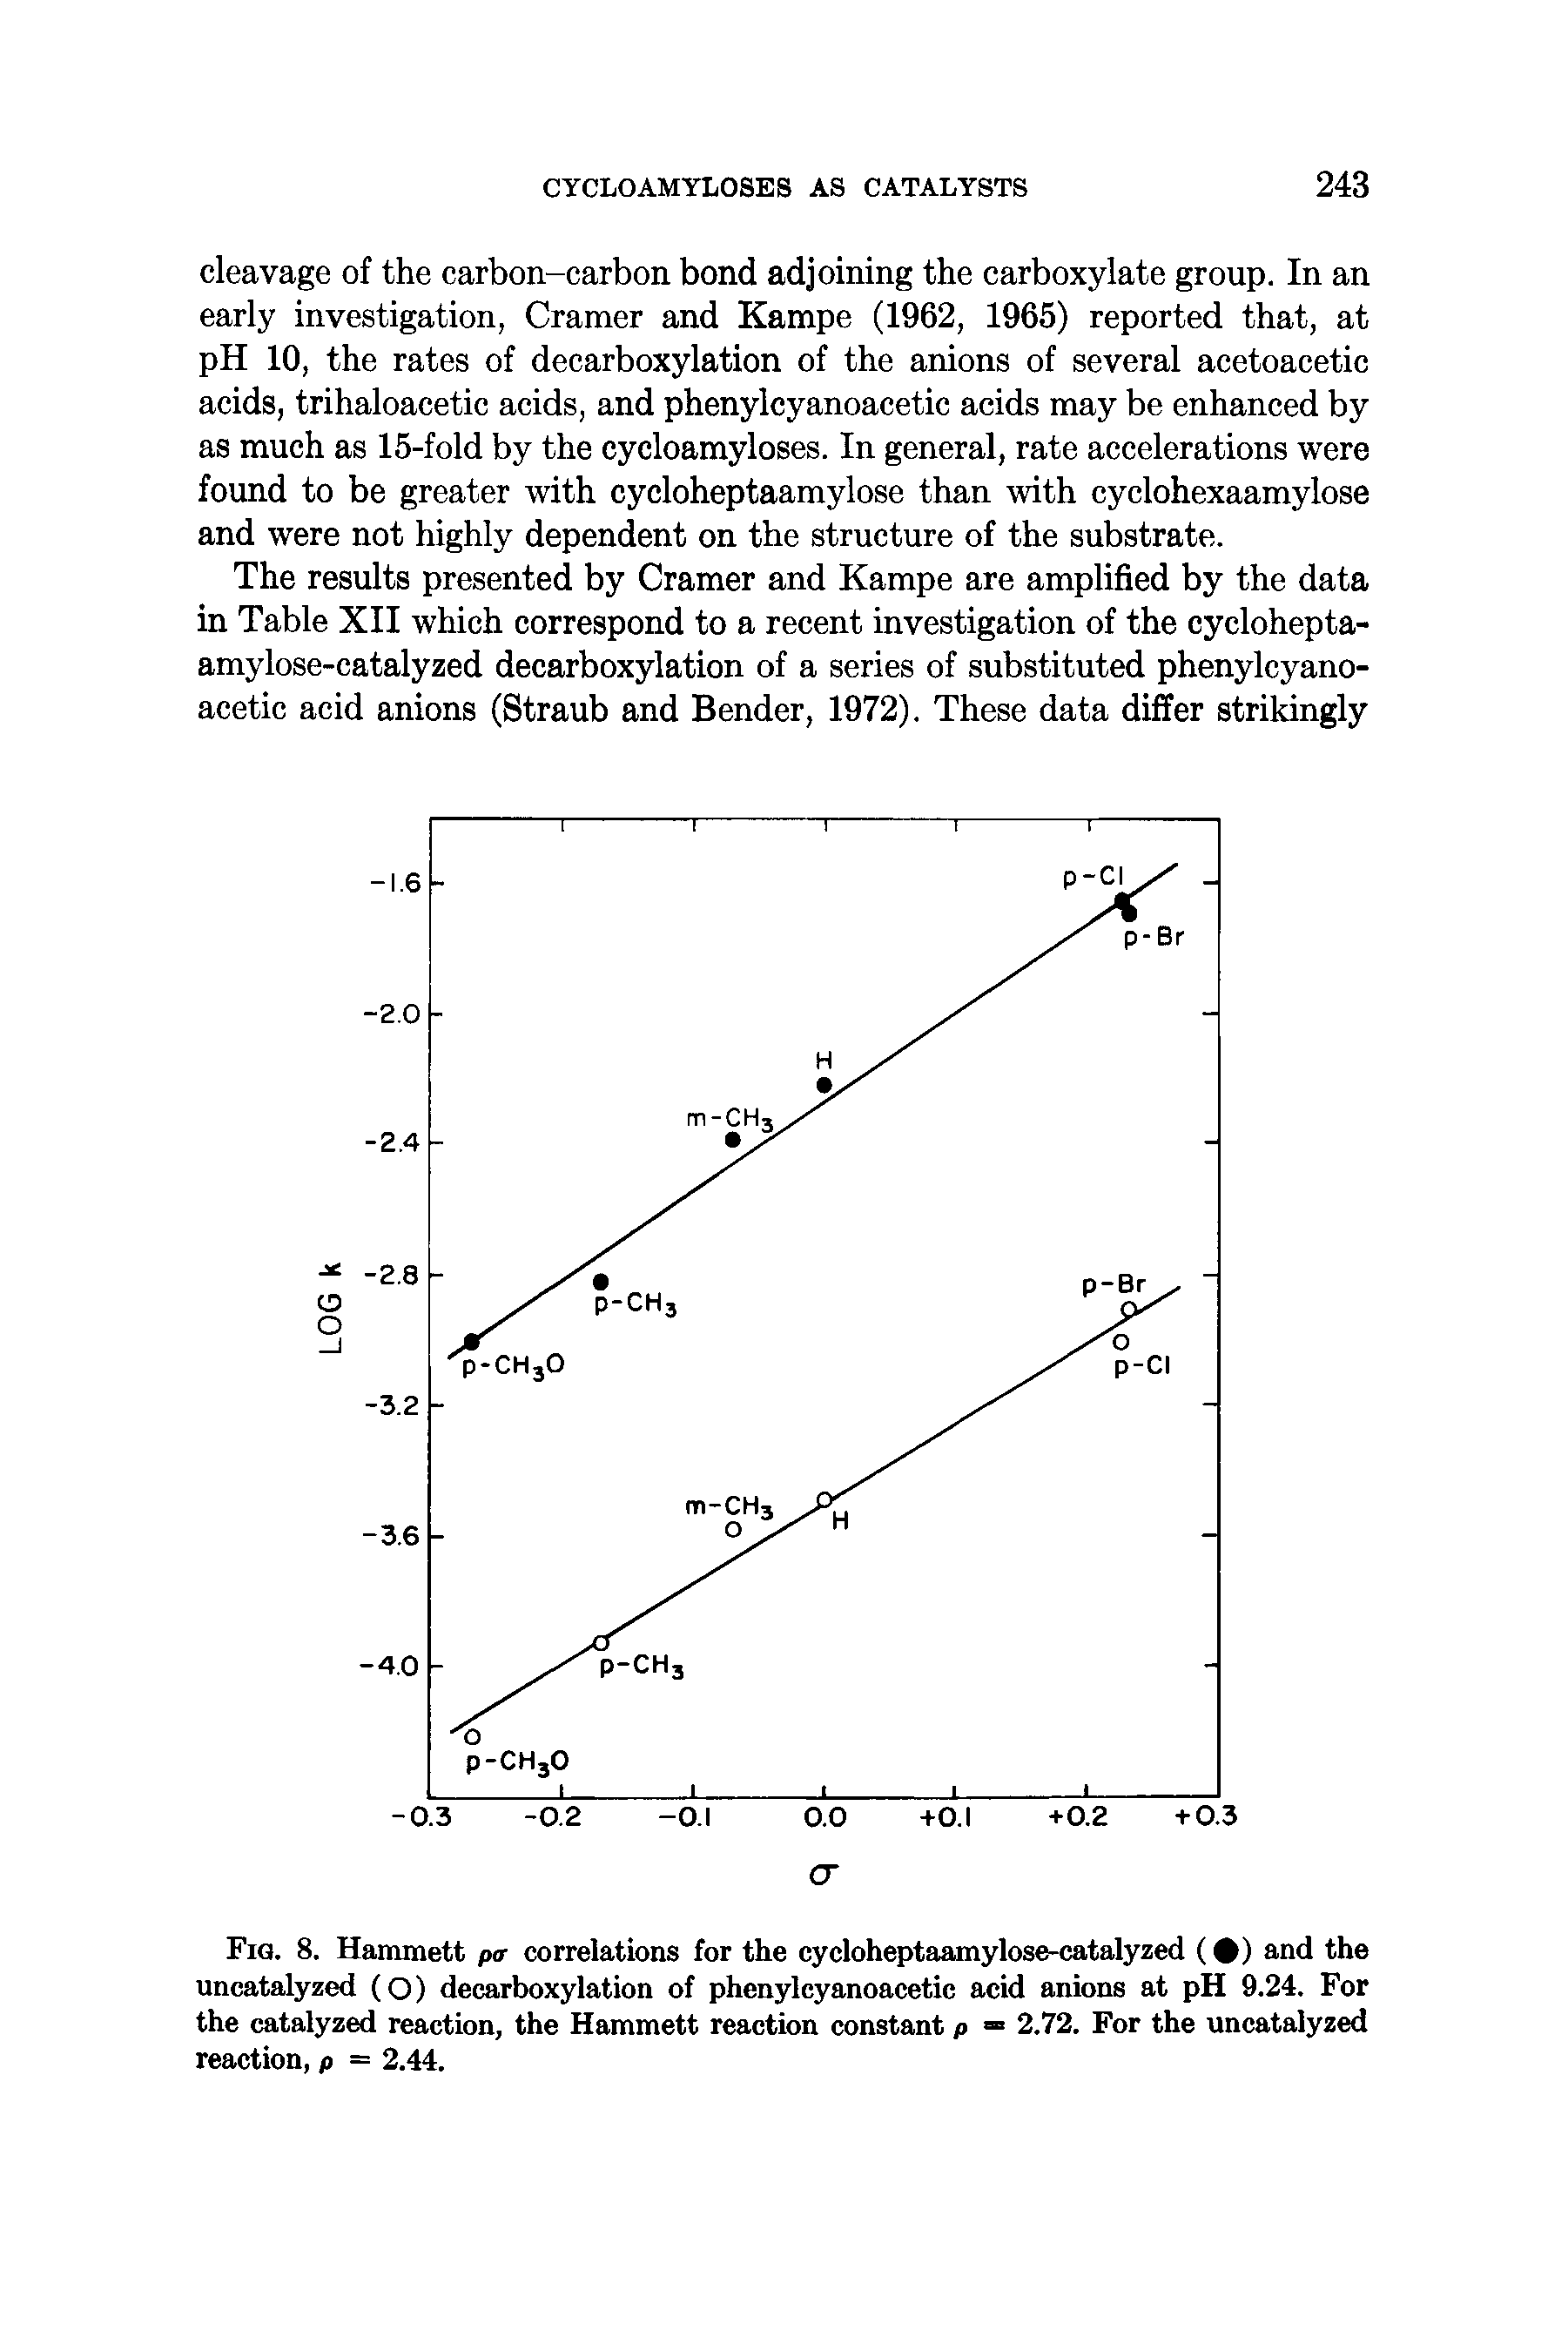 Fig. 8. Hammett pa correlations for the cycloheptaamylose-catalyzed ( ) and the uncatalyzed (O) decarboxylation of phenylcyanoacetic acid anions at pH 9.24. For the catalyzed reaction, the Hammett reaction constant p = 2.72. For the uncatalyzed reaction, p = 2.44.